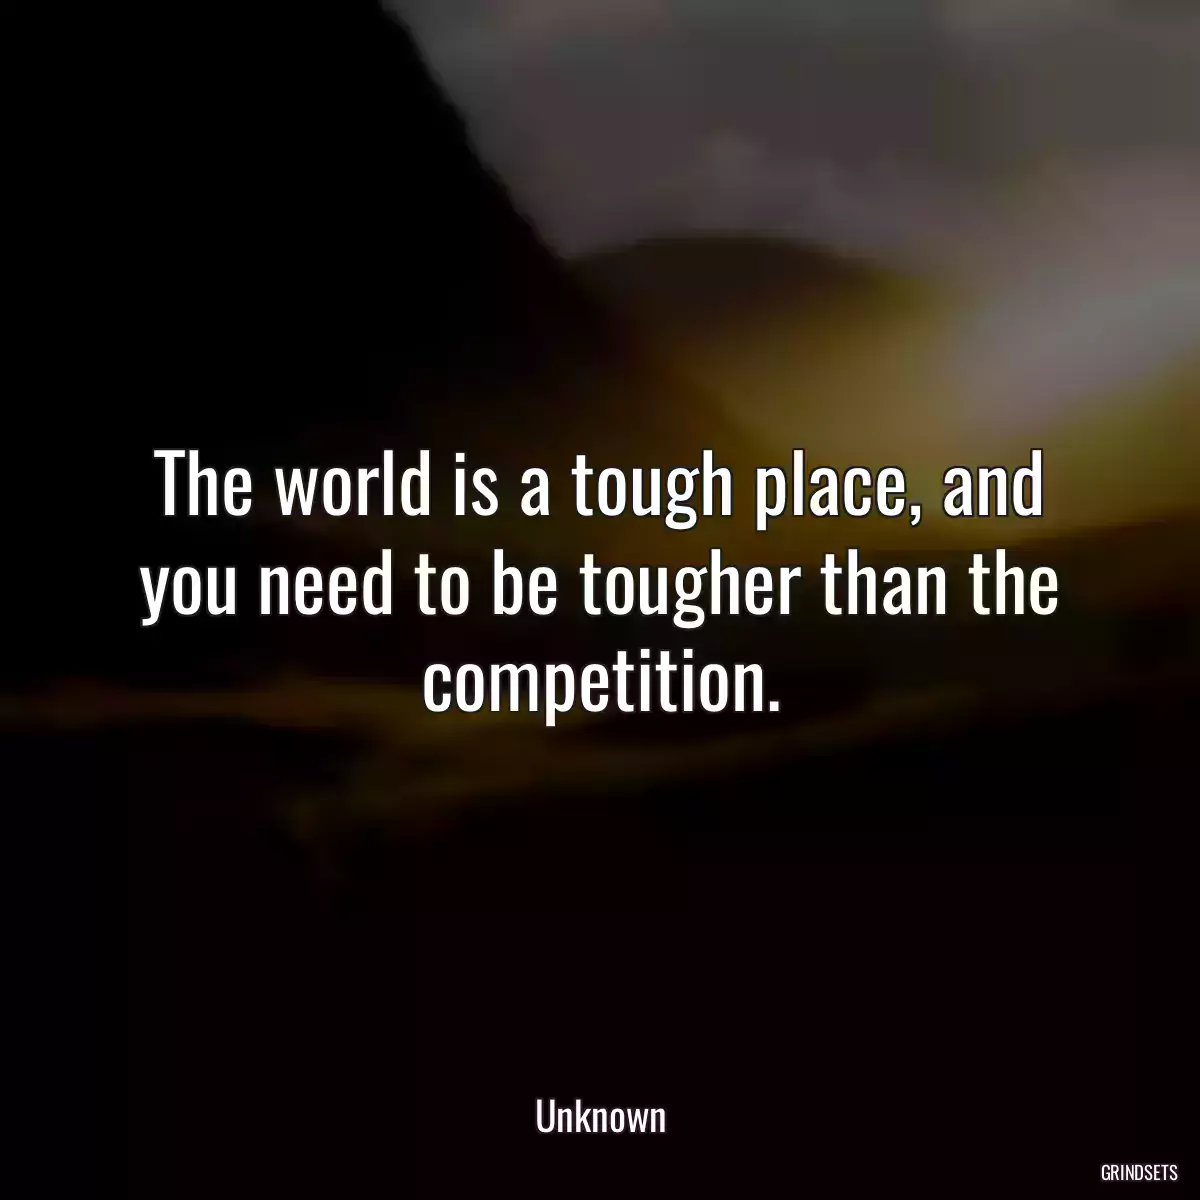 The world is a tough place, and you need to be tougher than the competition.